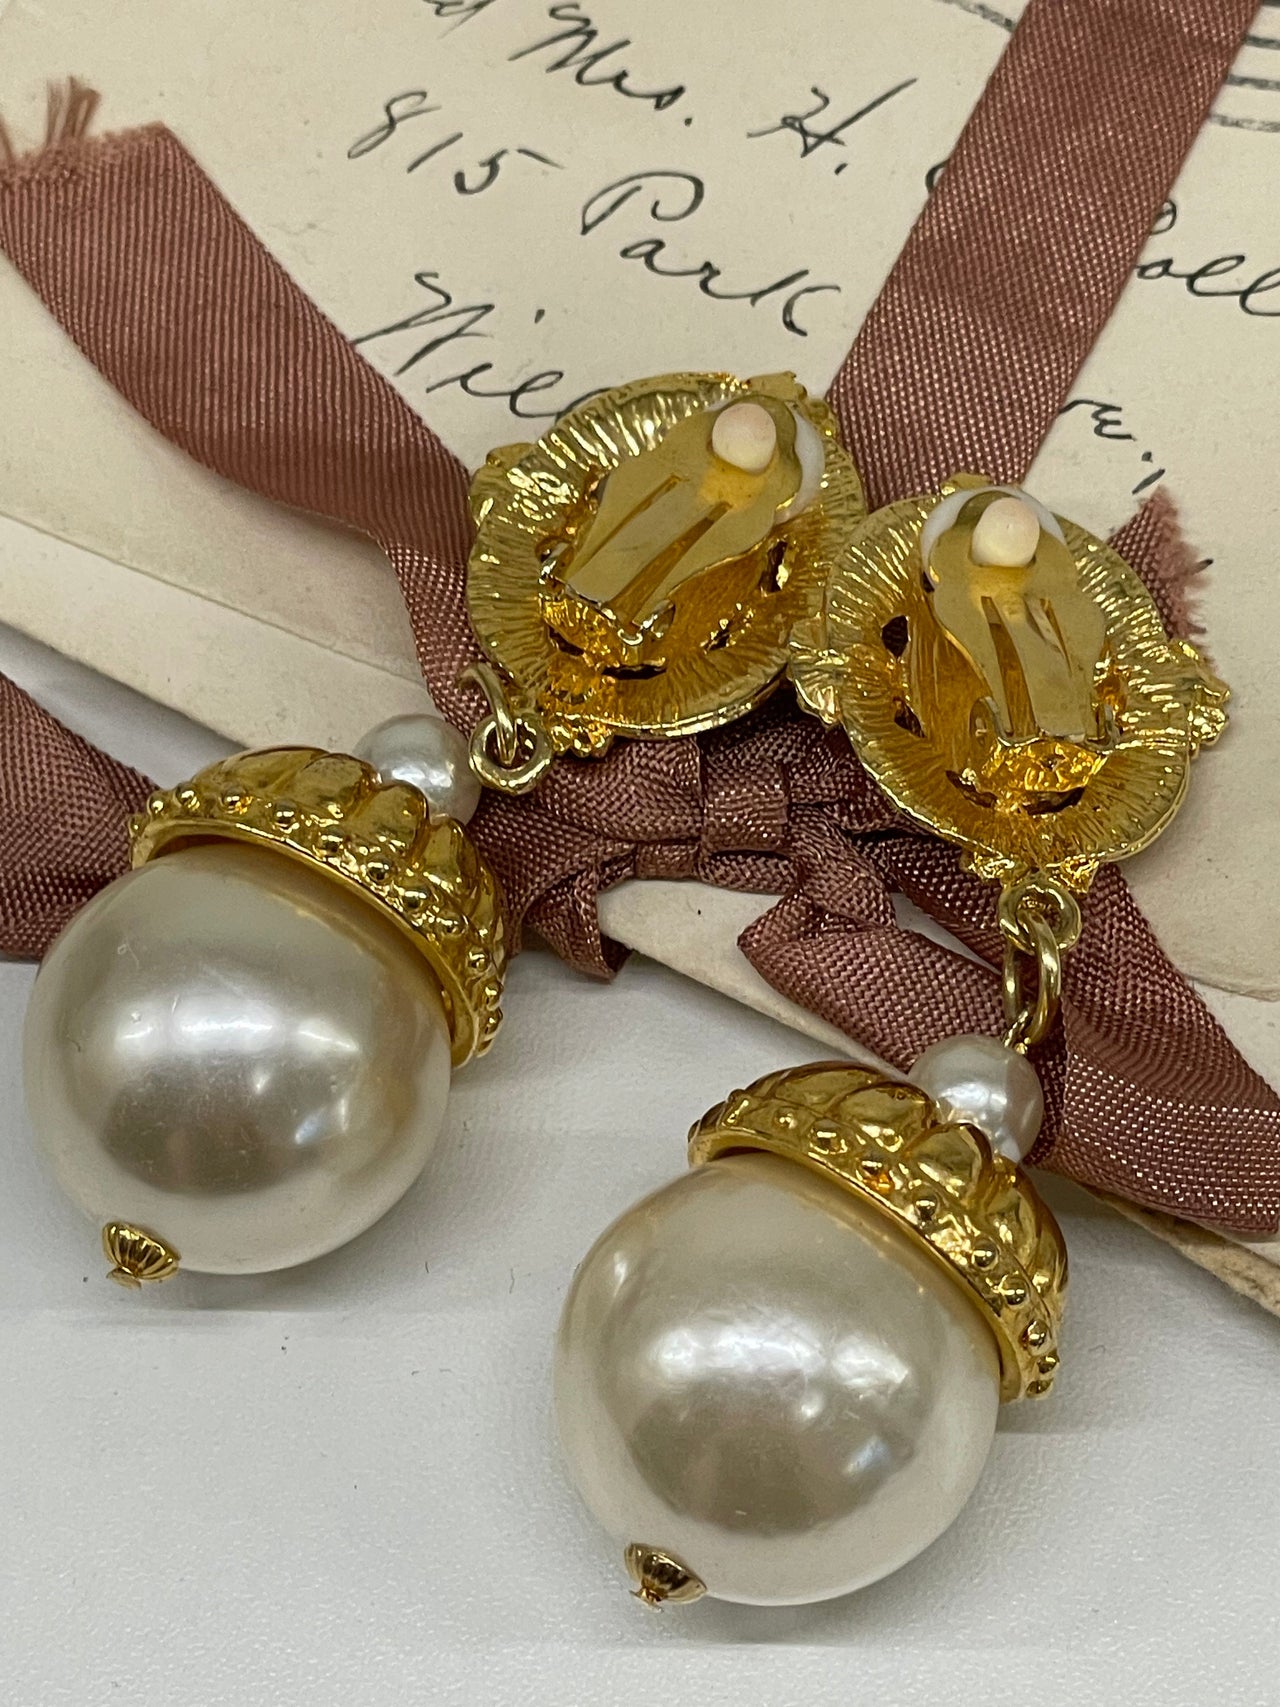 Large Gold Pearl and Rhinestone Earrings Bloomers and Frocks 